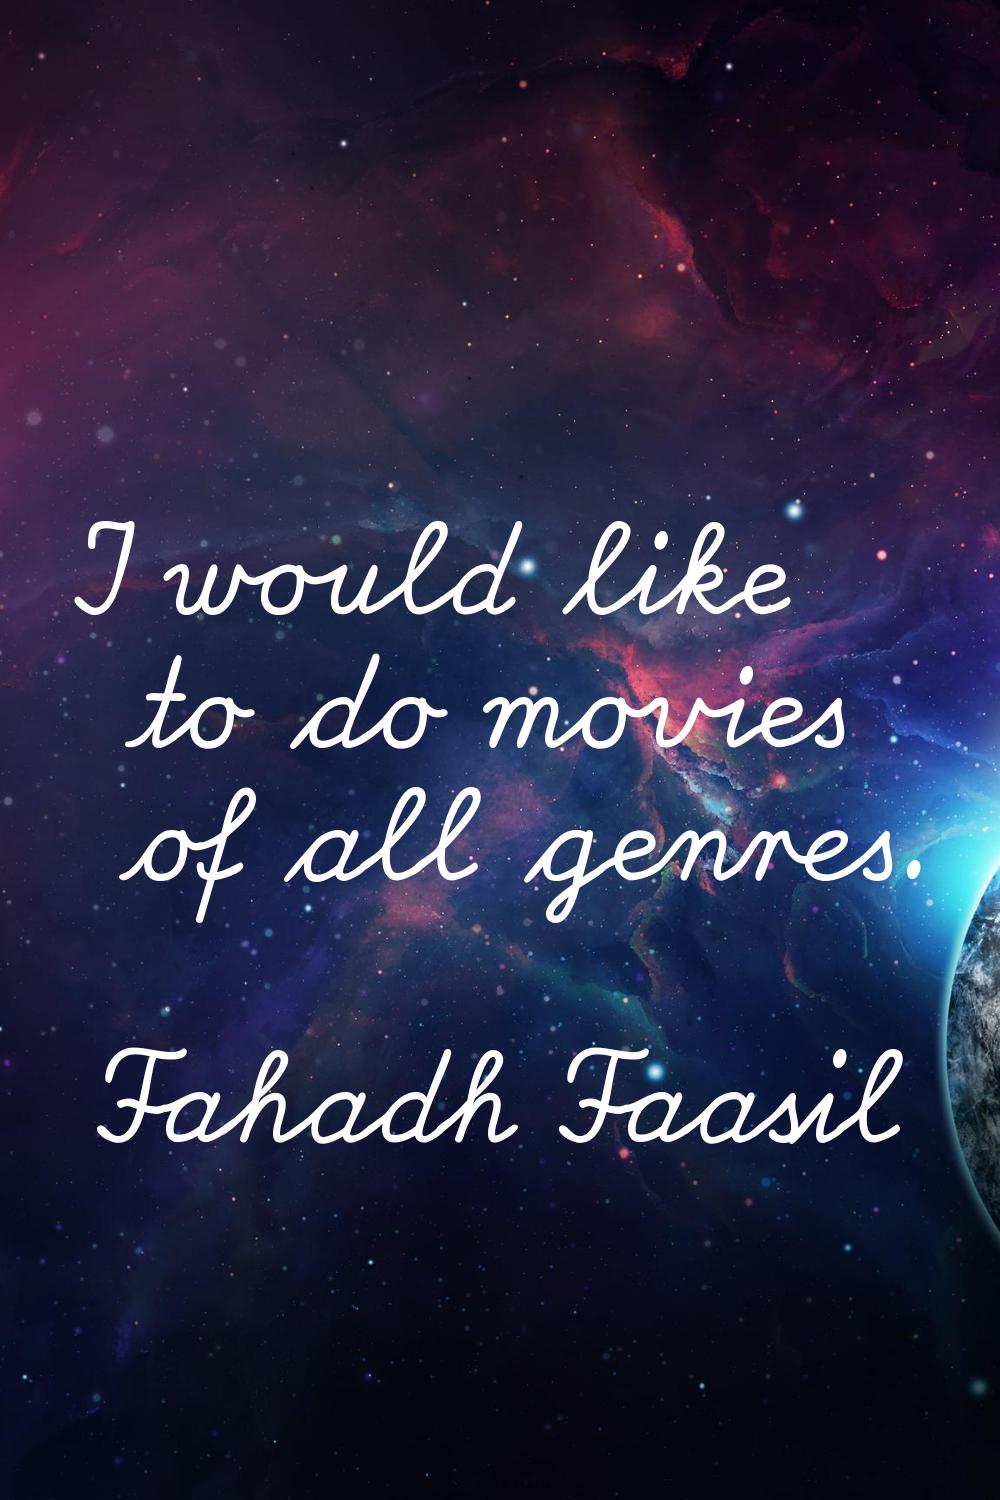 I would like to do movies of all genres.